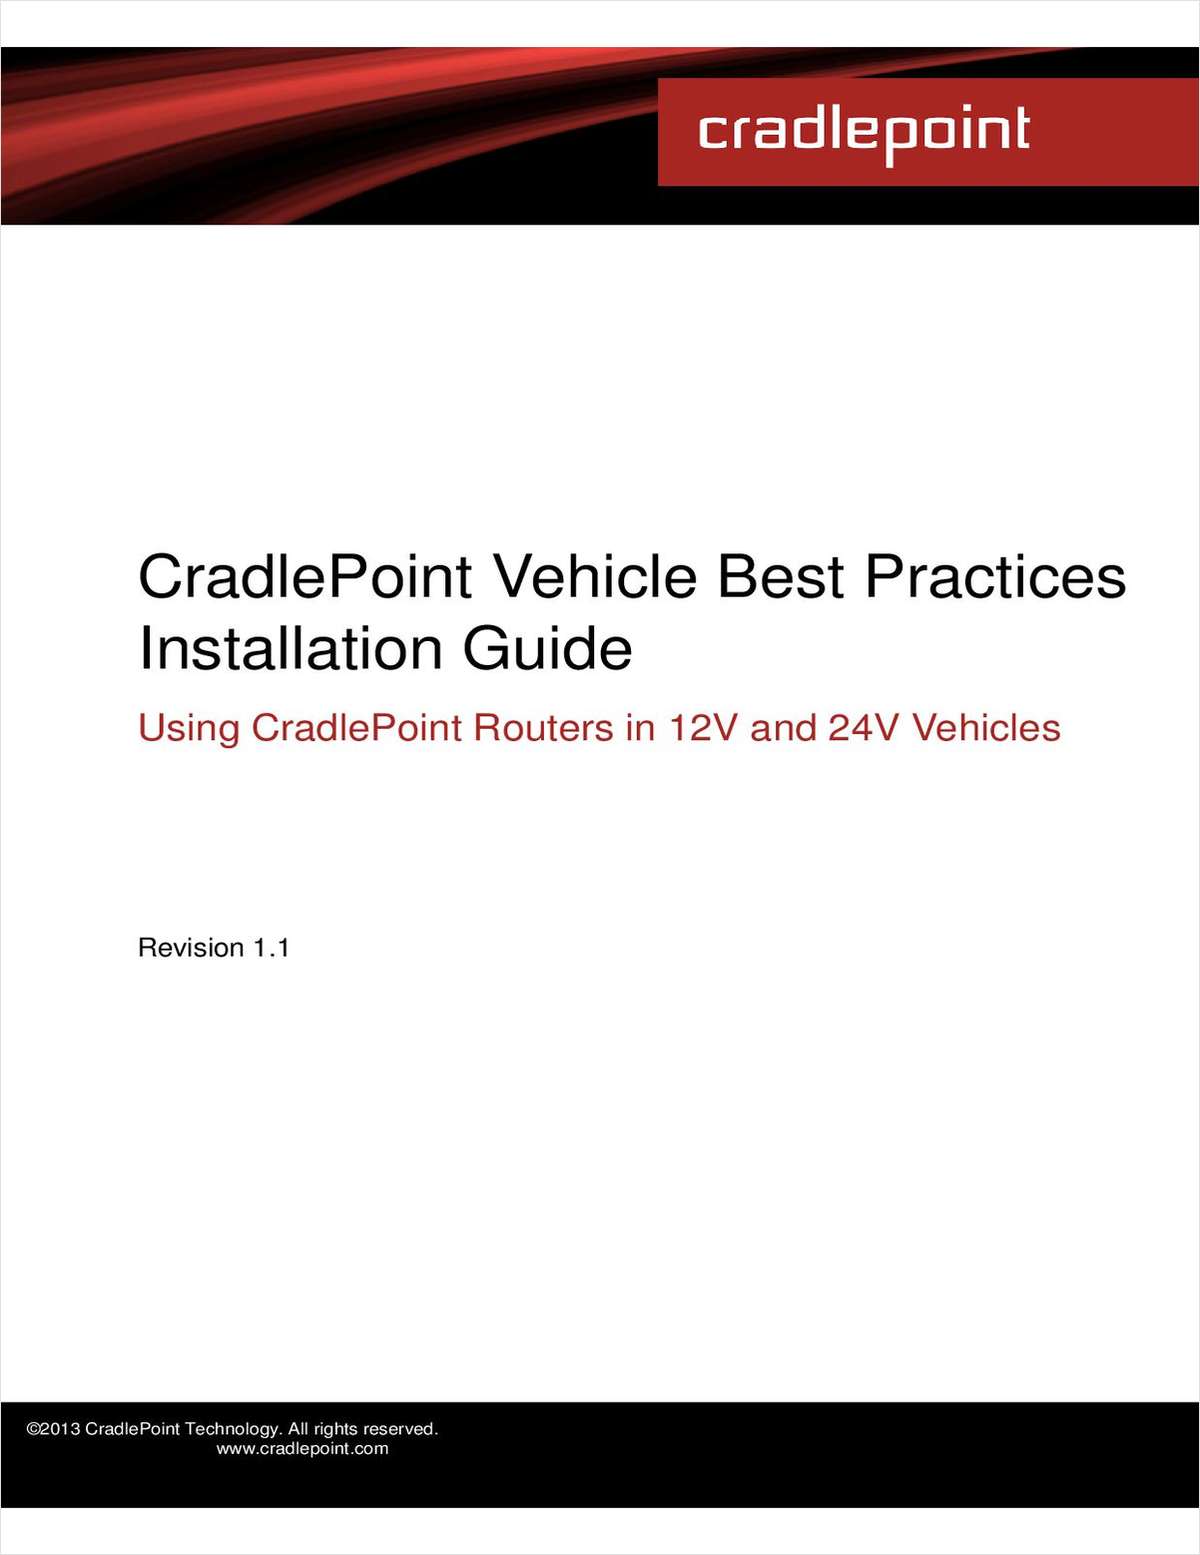 Vehicles Best Practices Installation Guide